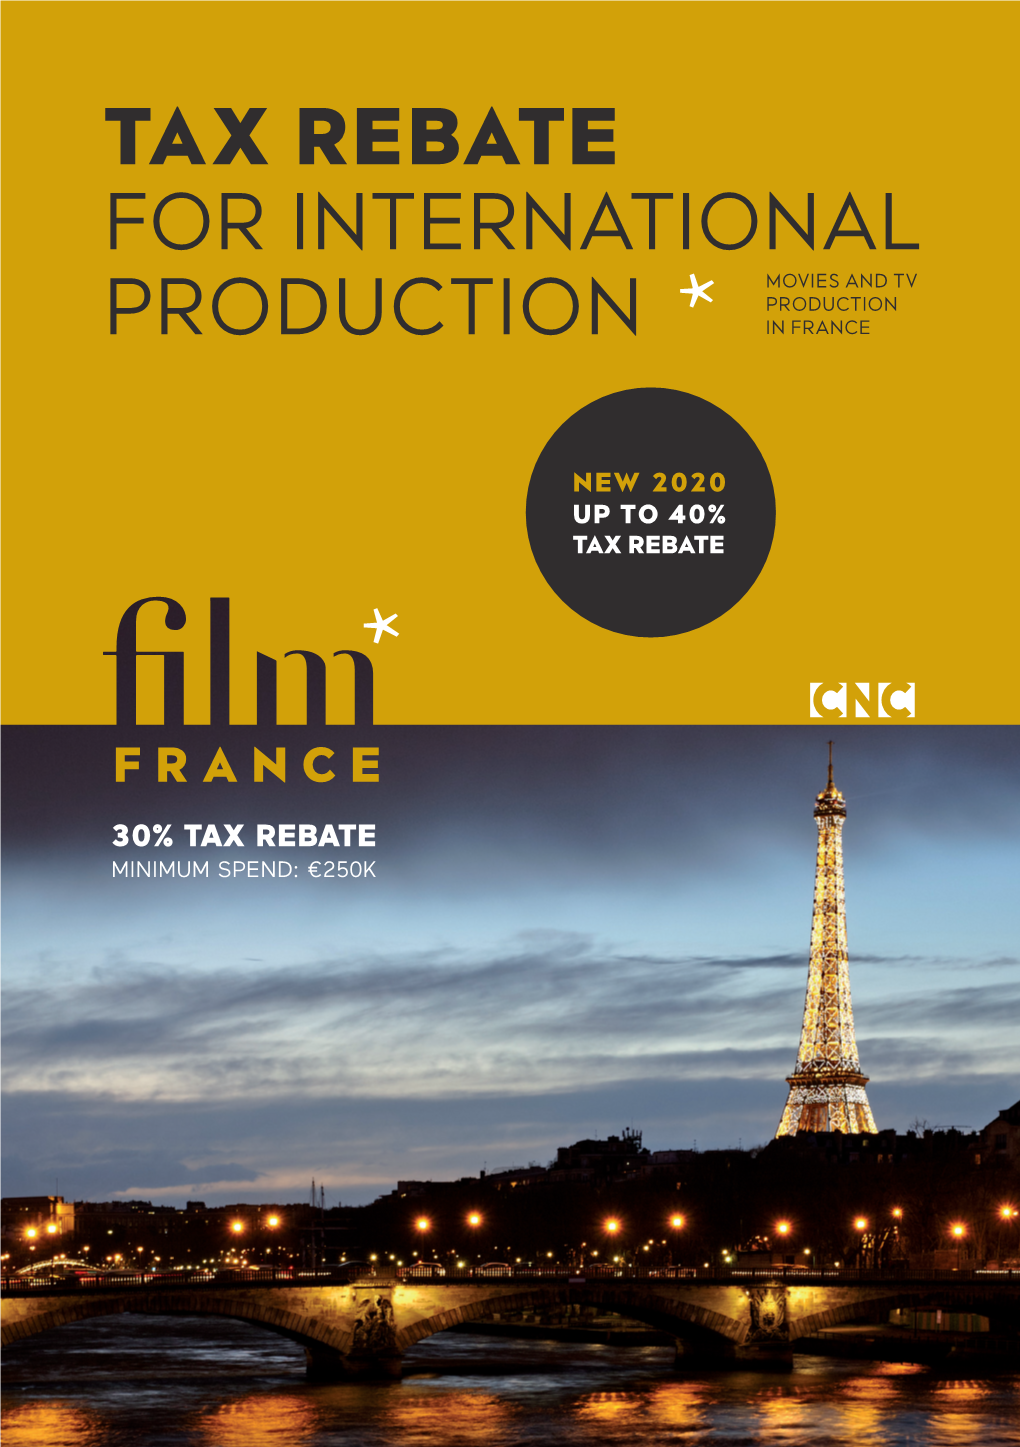 Tax Rebate for International Movies and Tv Production Production in France